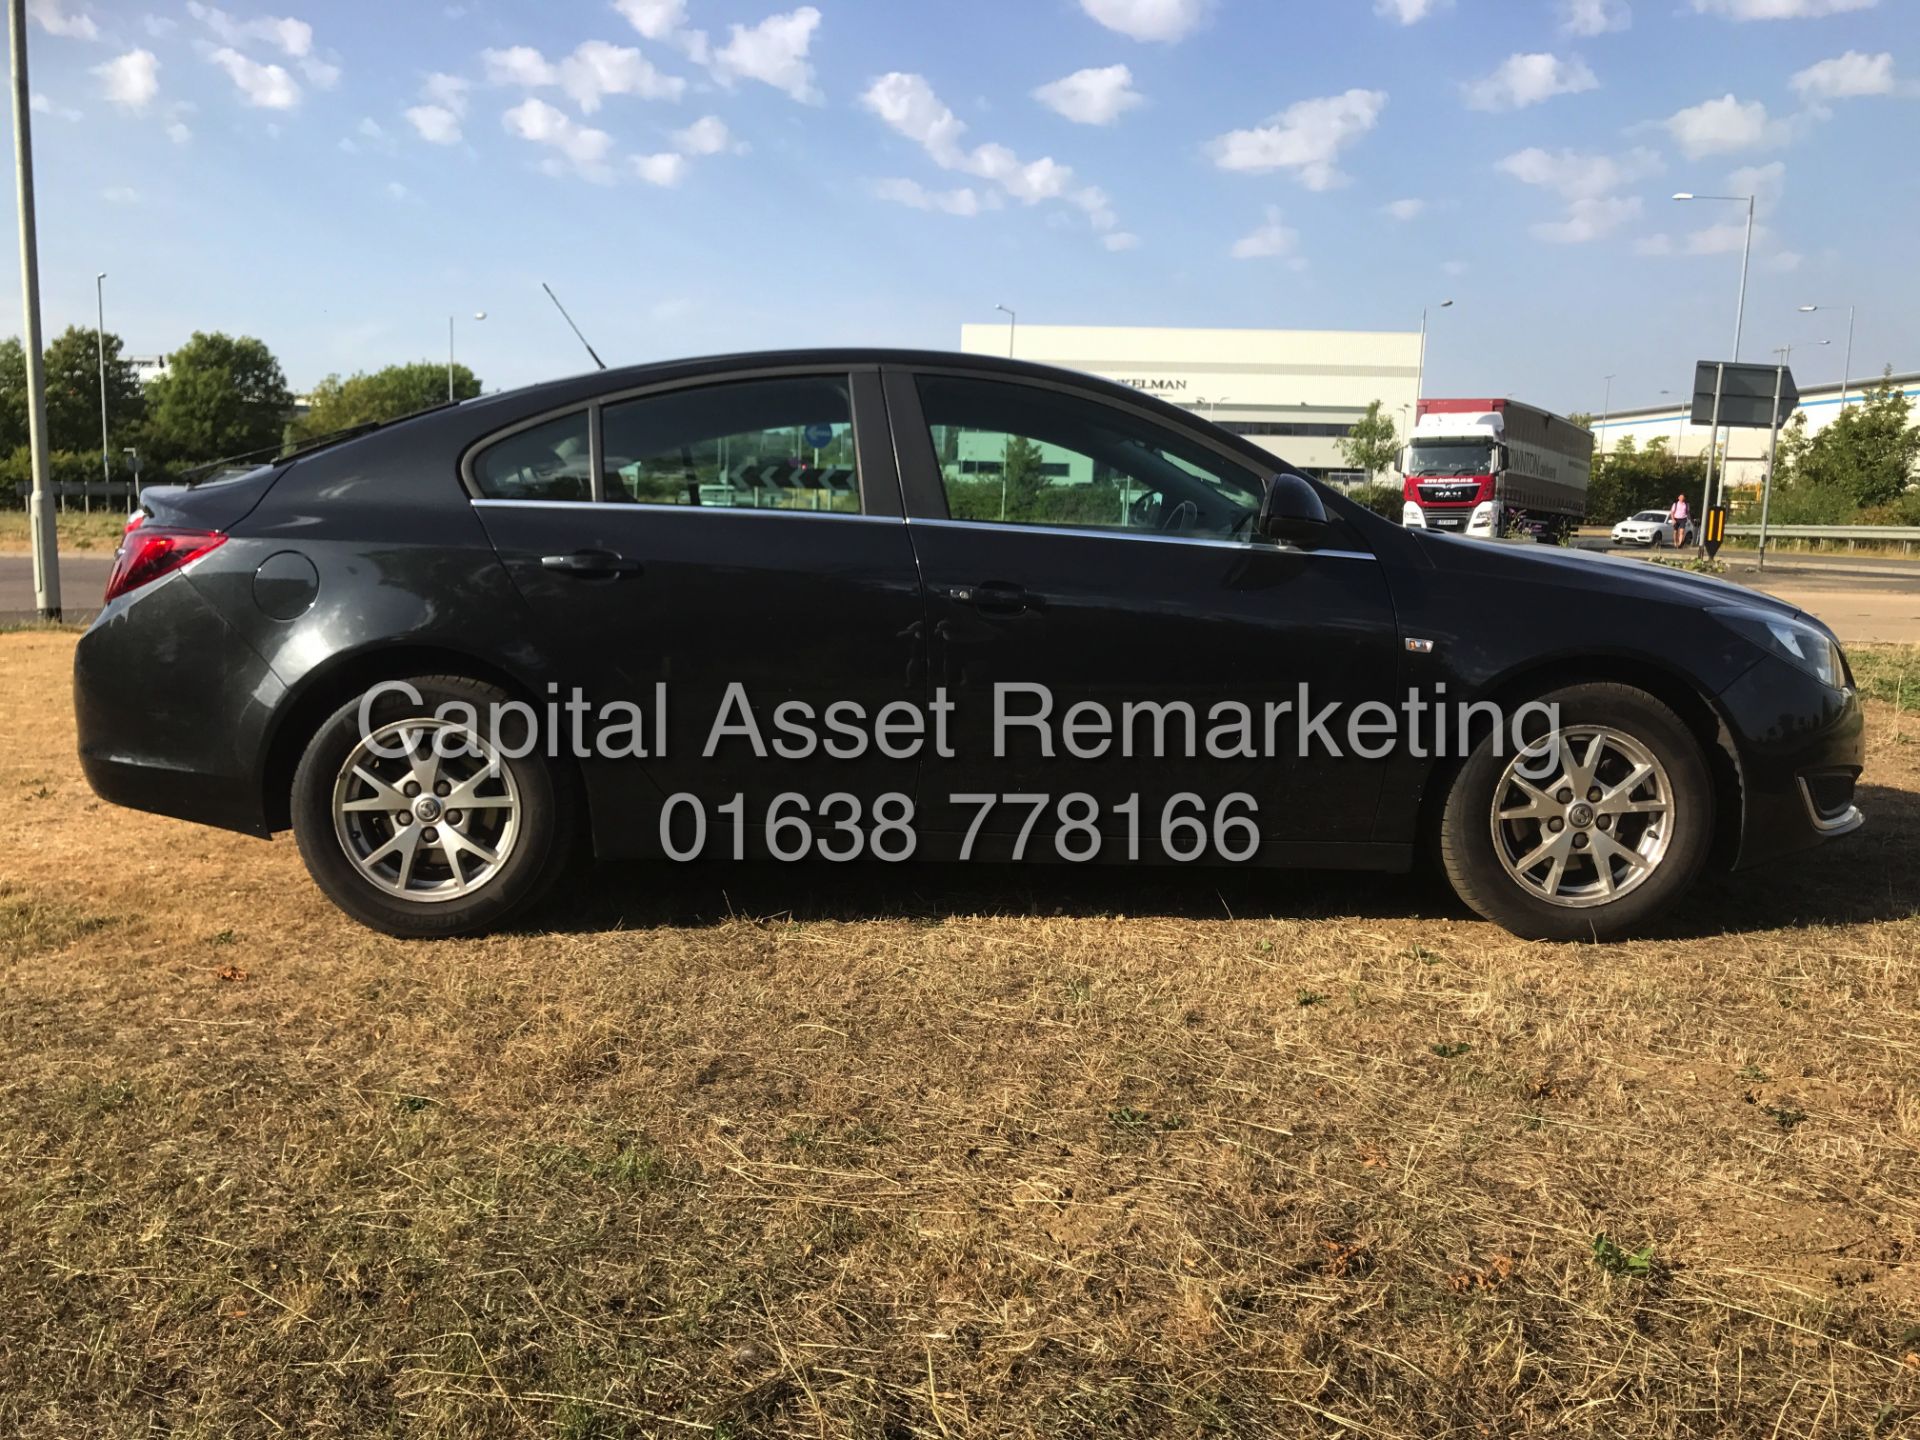 On Sale VAUXHALL INSIGNIA 2.0CDTI "DESIGN" 6 SPEED (2014 MODEL-NEW SHAPE) AIR CON -ELEC PACK -CRUISE - Image 7 of 22